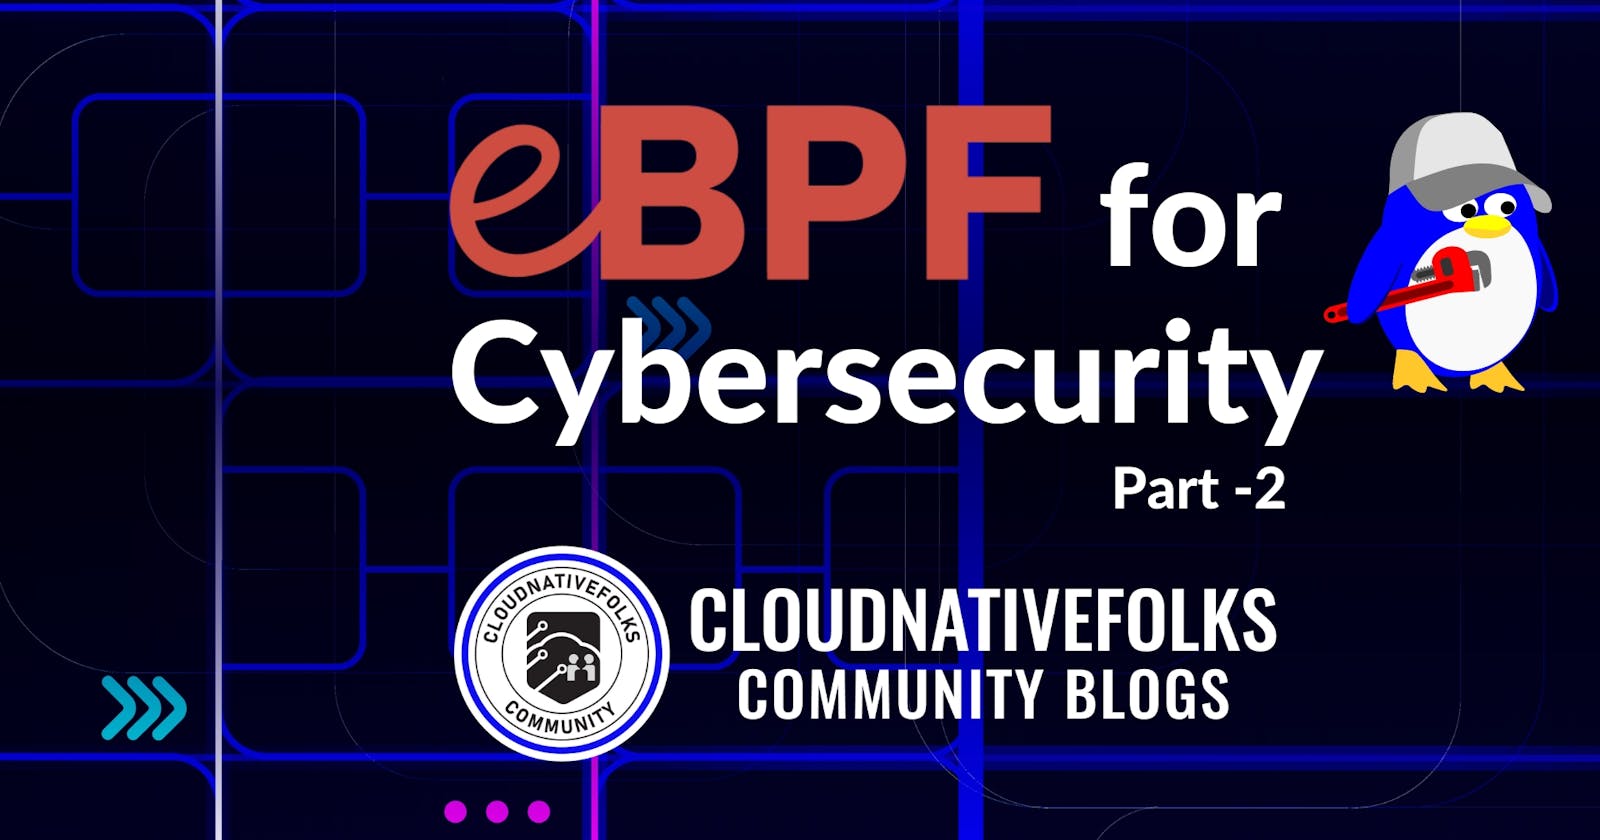 eBPF for Cybersecurity - Part 2